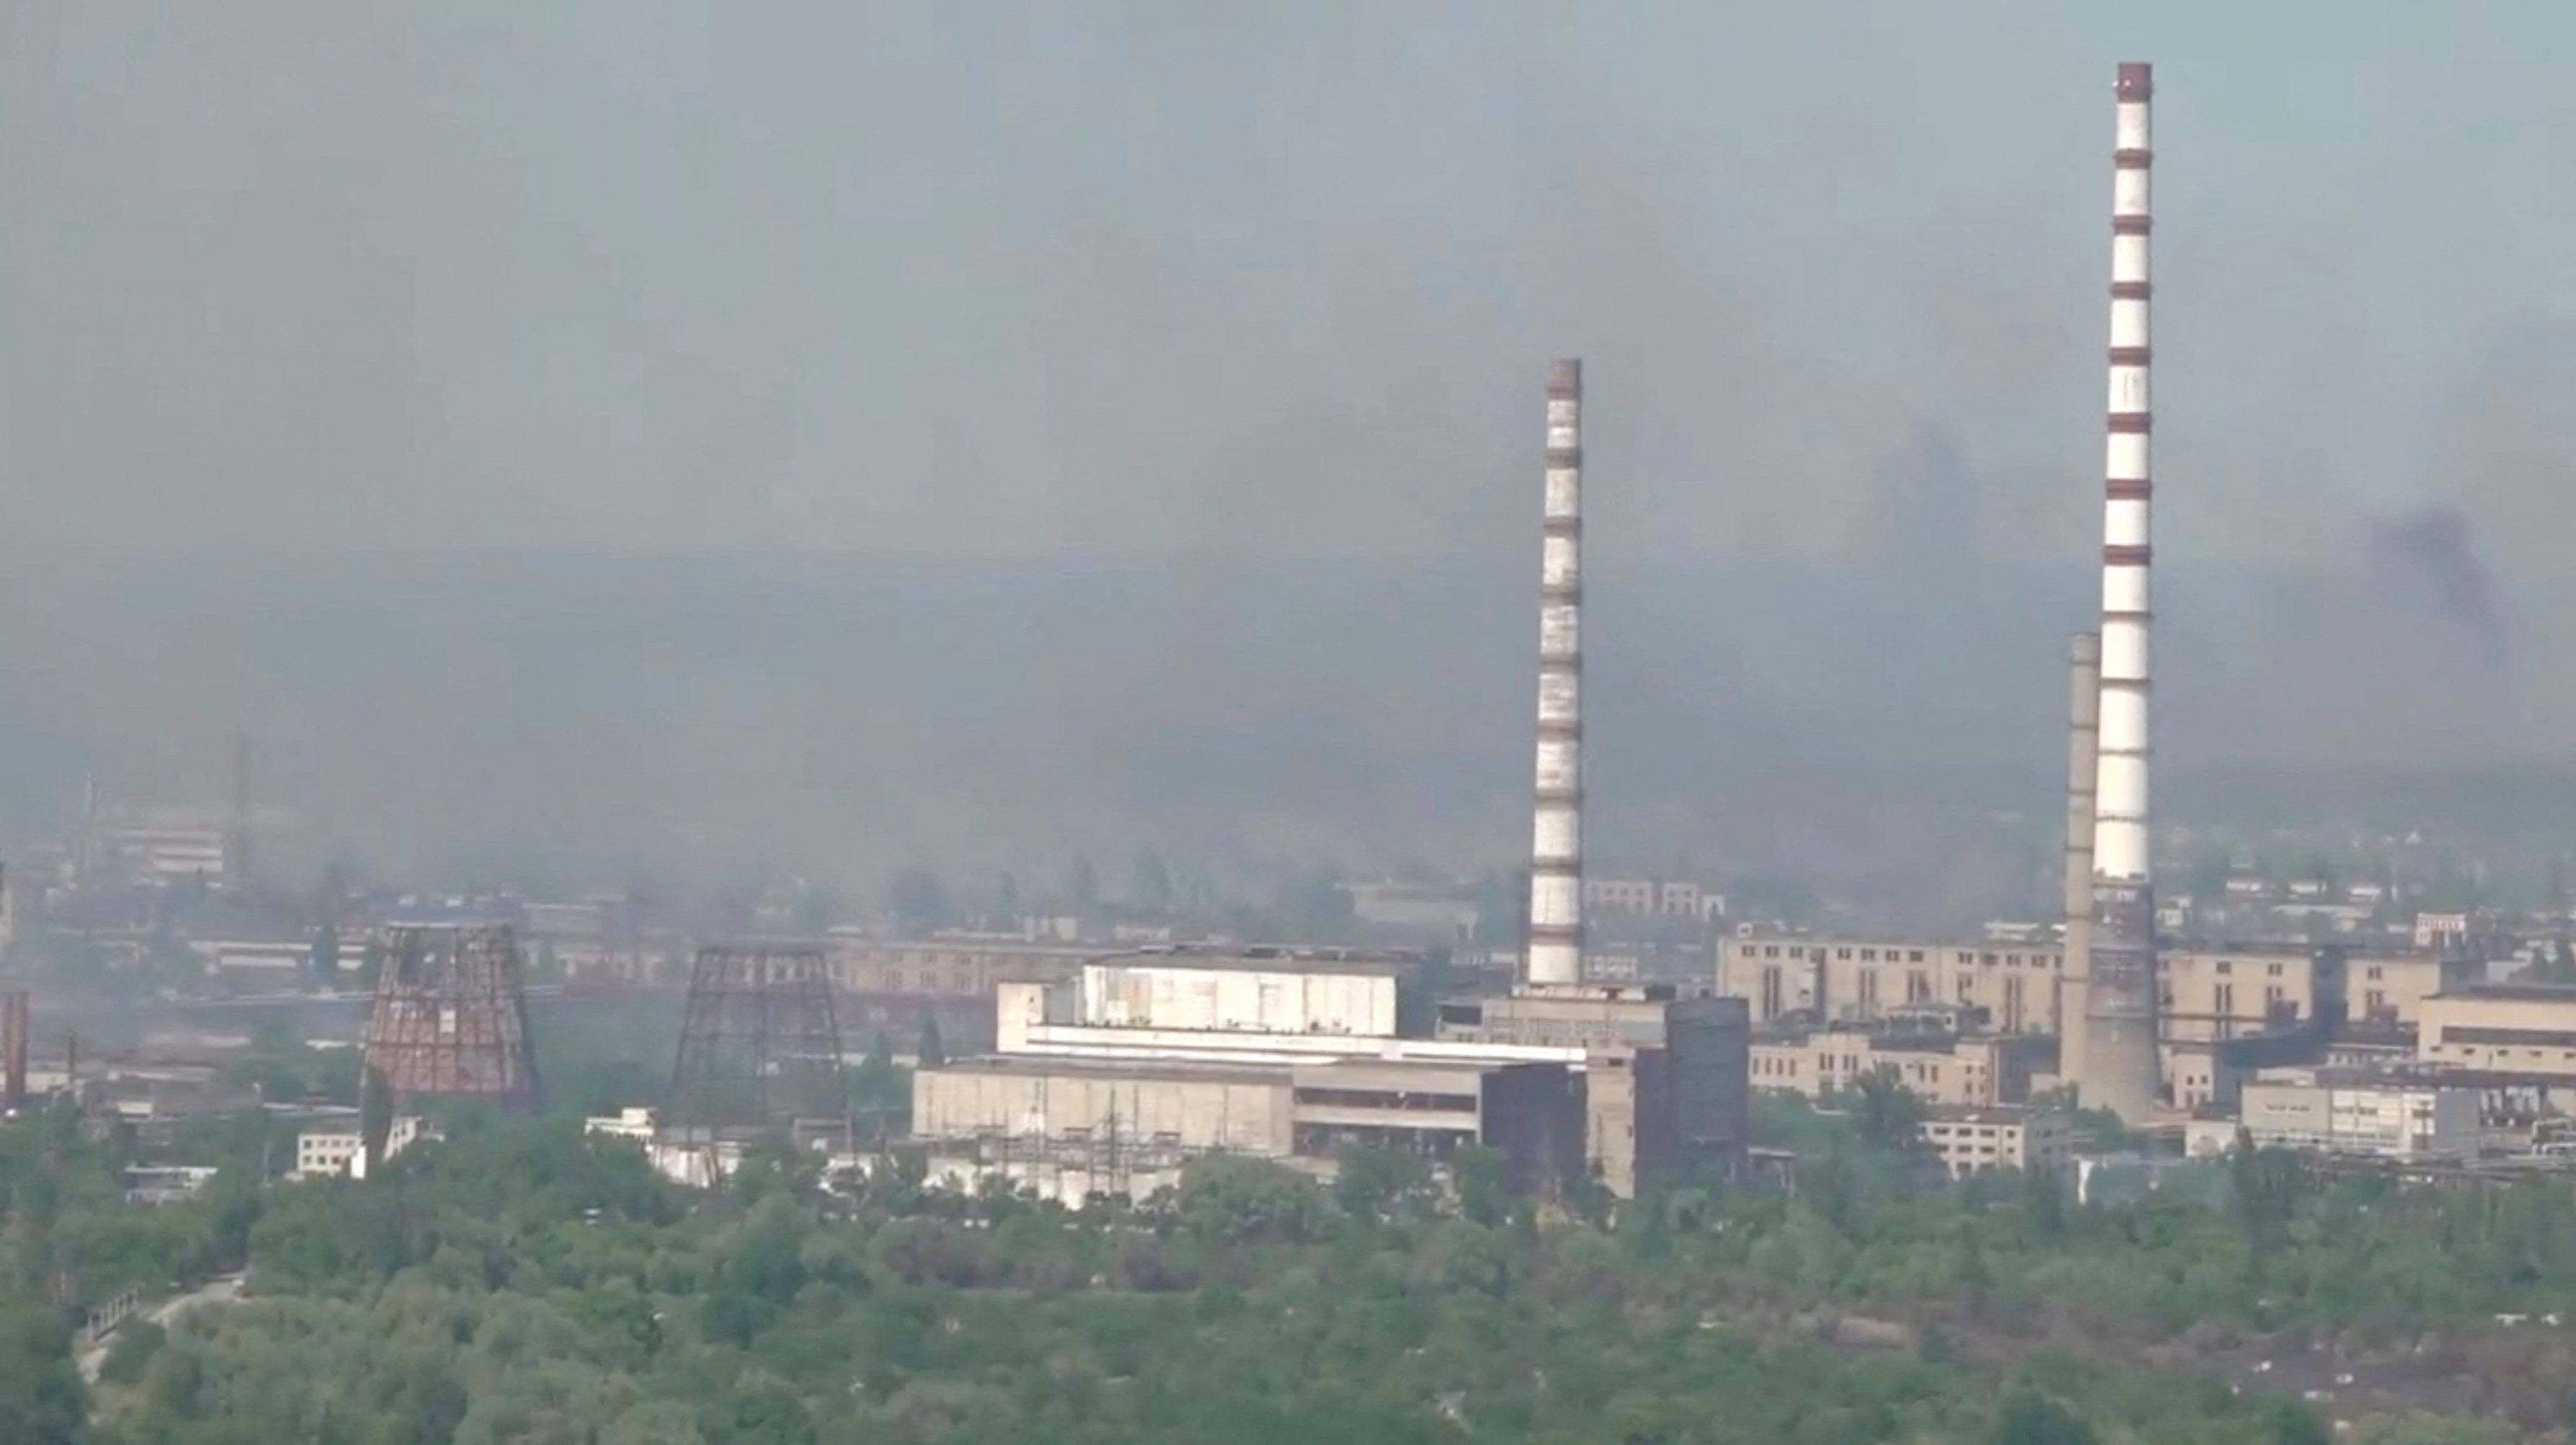 Black smoke billows over Sievierodonetsk Azot chemical plant as Russia's invasion on Ukraine continues, in Sievierodonetsk